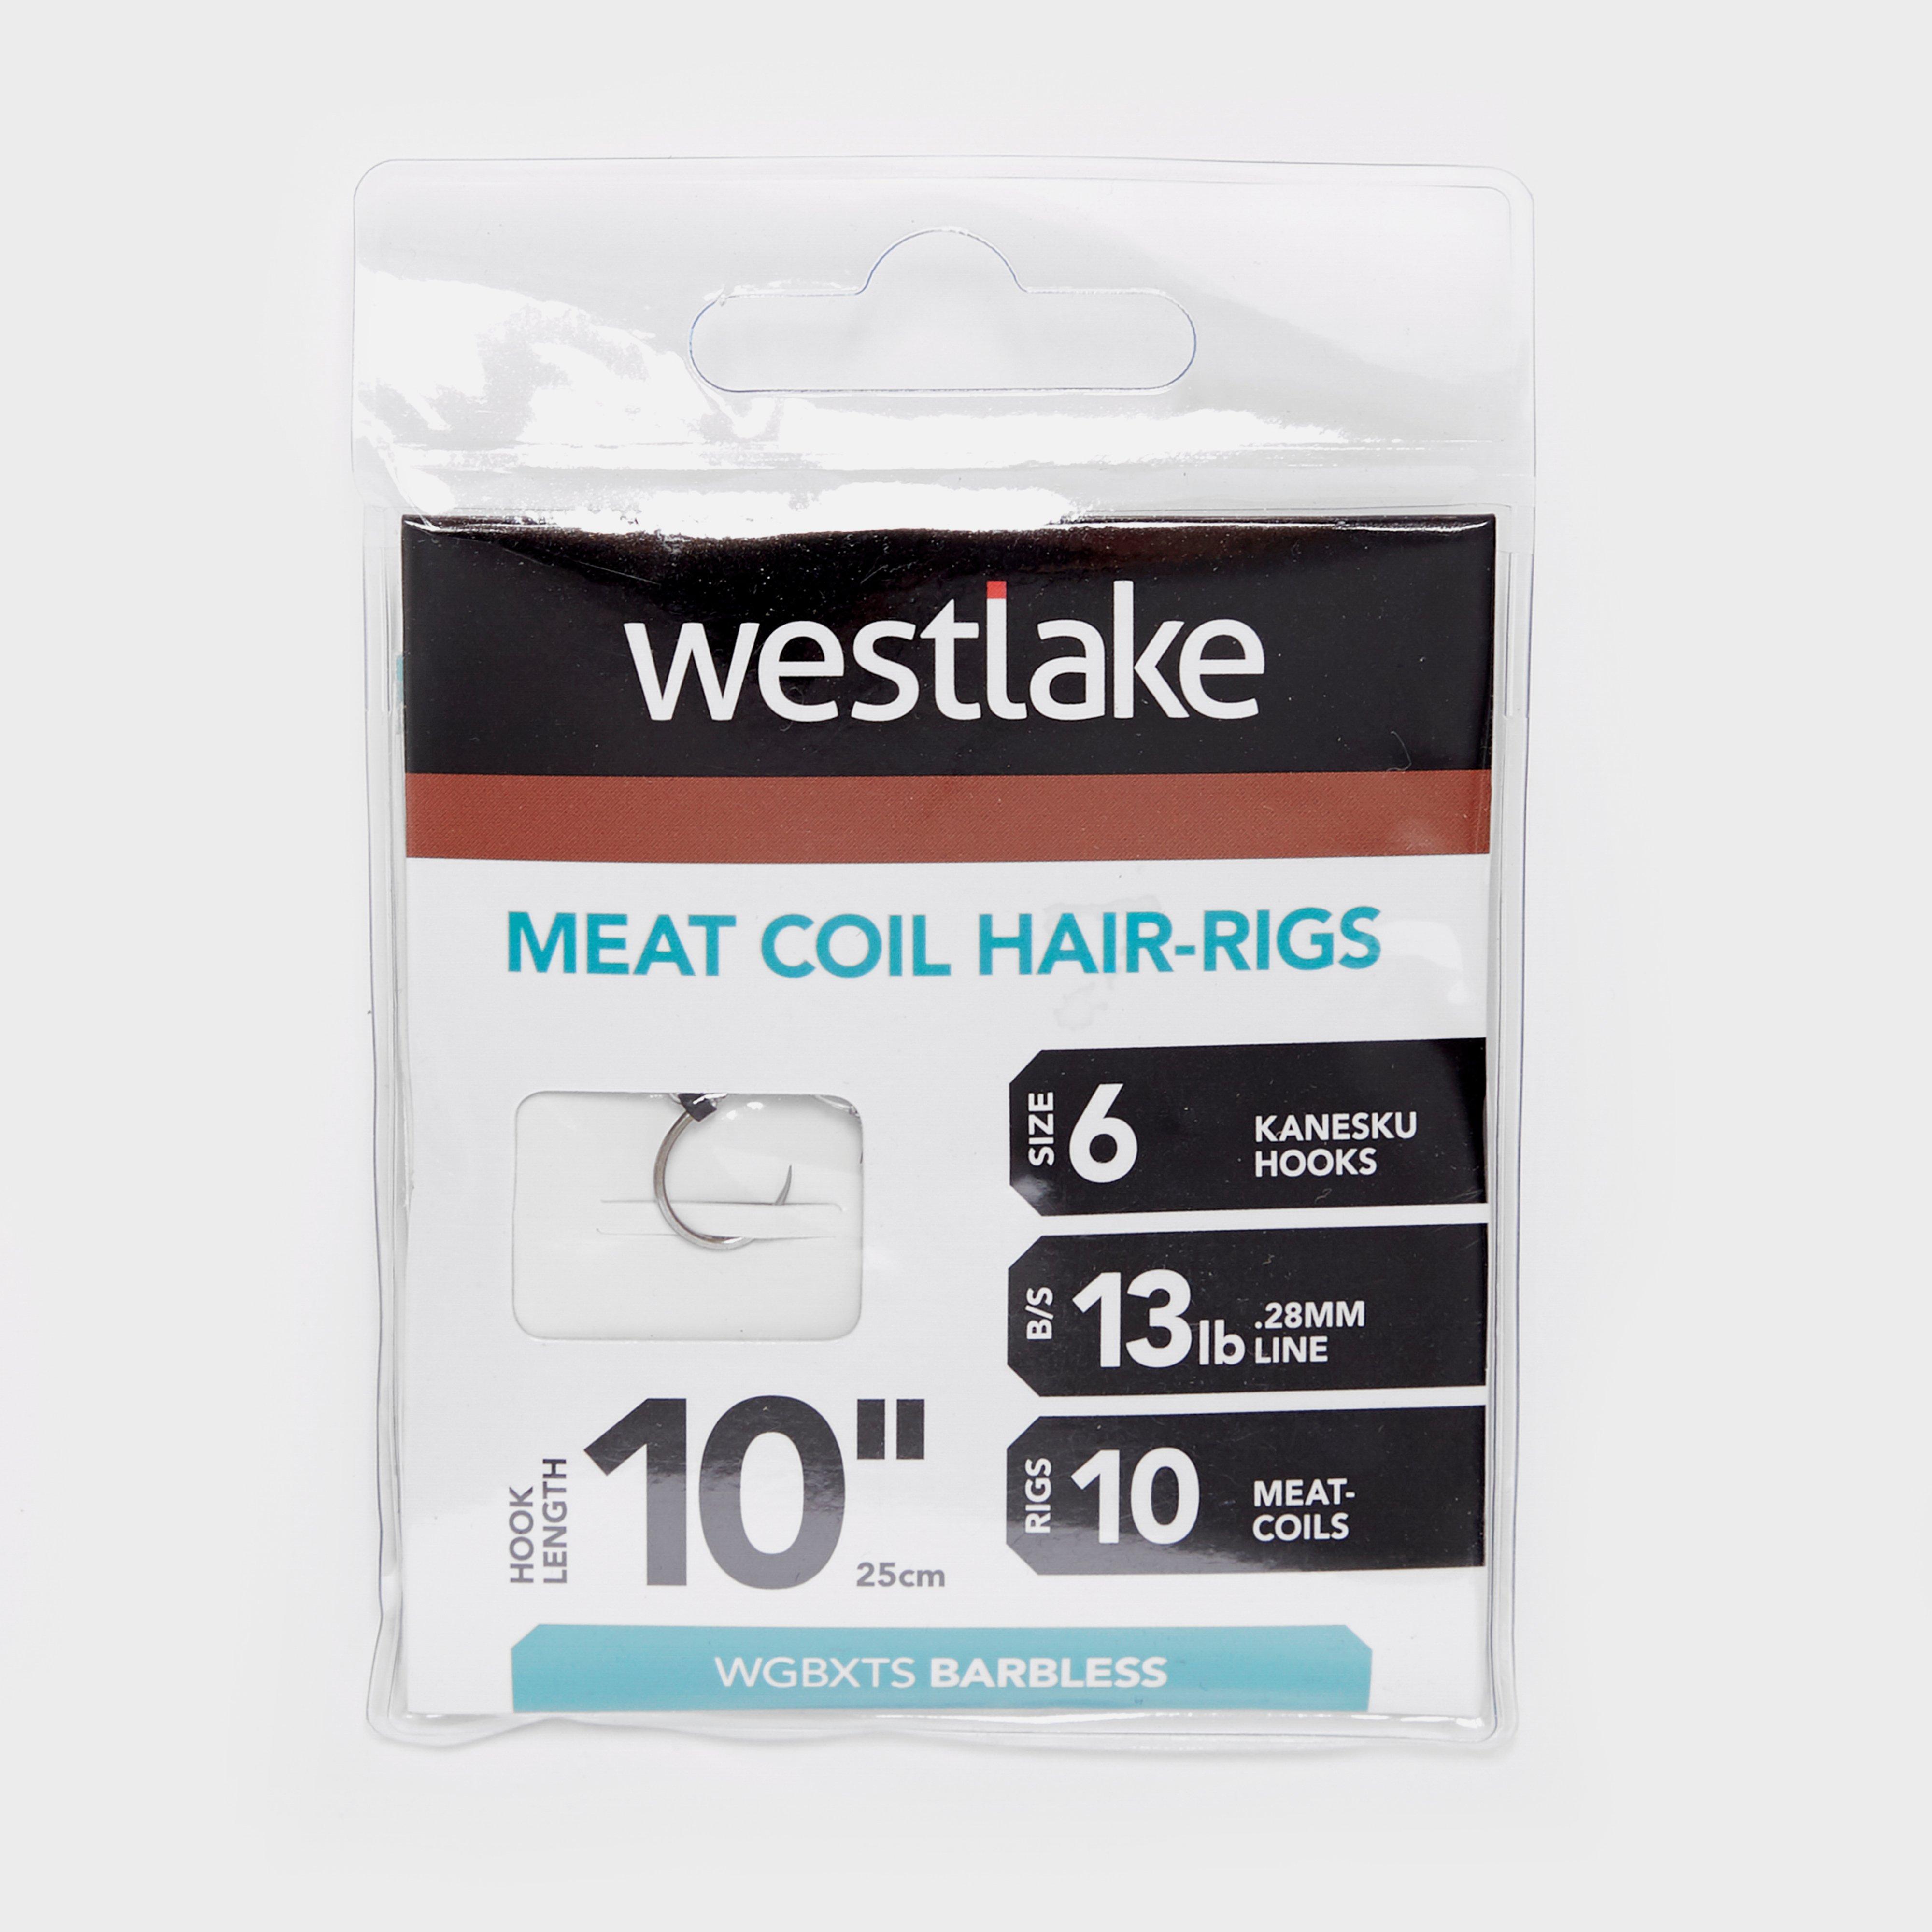 Westlake Meat Coil Hair-rigs (size 6) - Silver/co  Silver/co